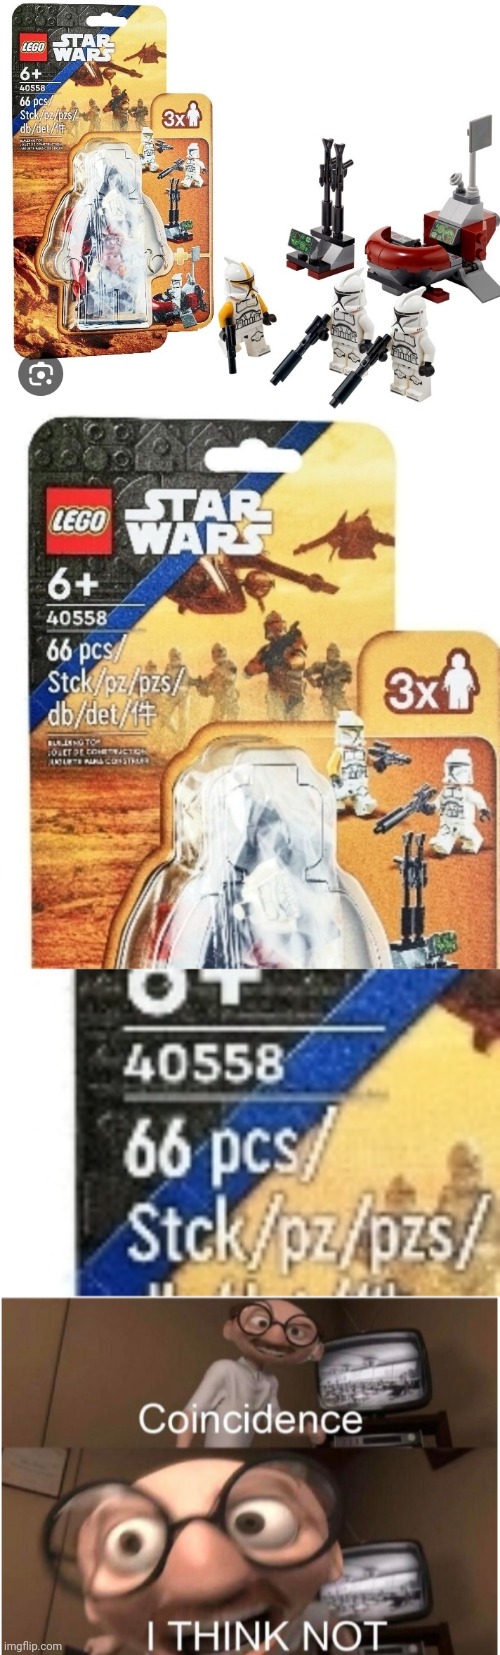 Star Wars fans will get it | image tagged in coincidence i think not,order 66,execute order 66,lego star wars,star wars | made w/ Imgflip meme maker